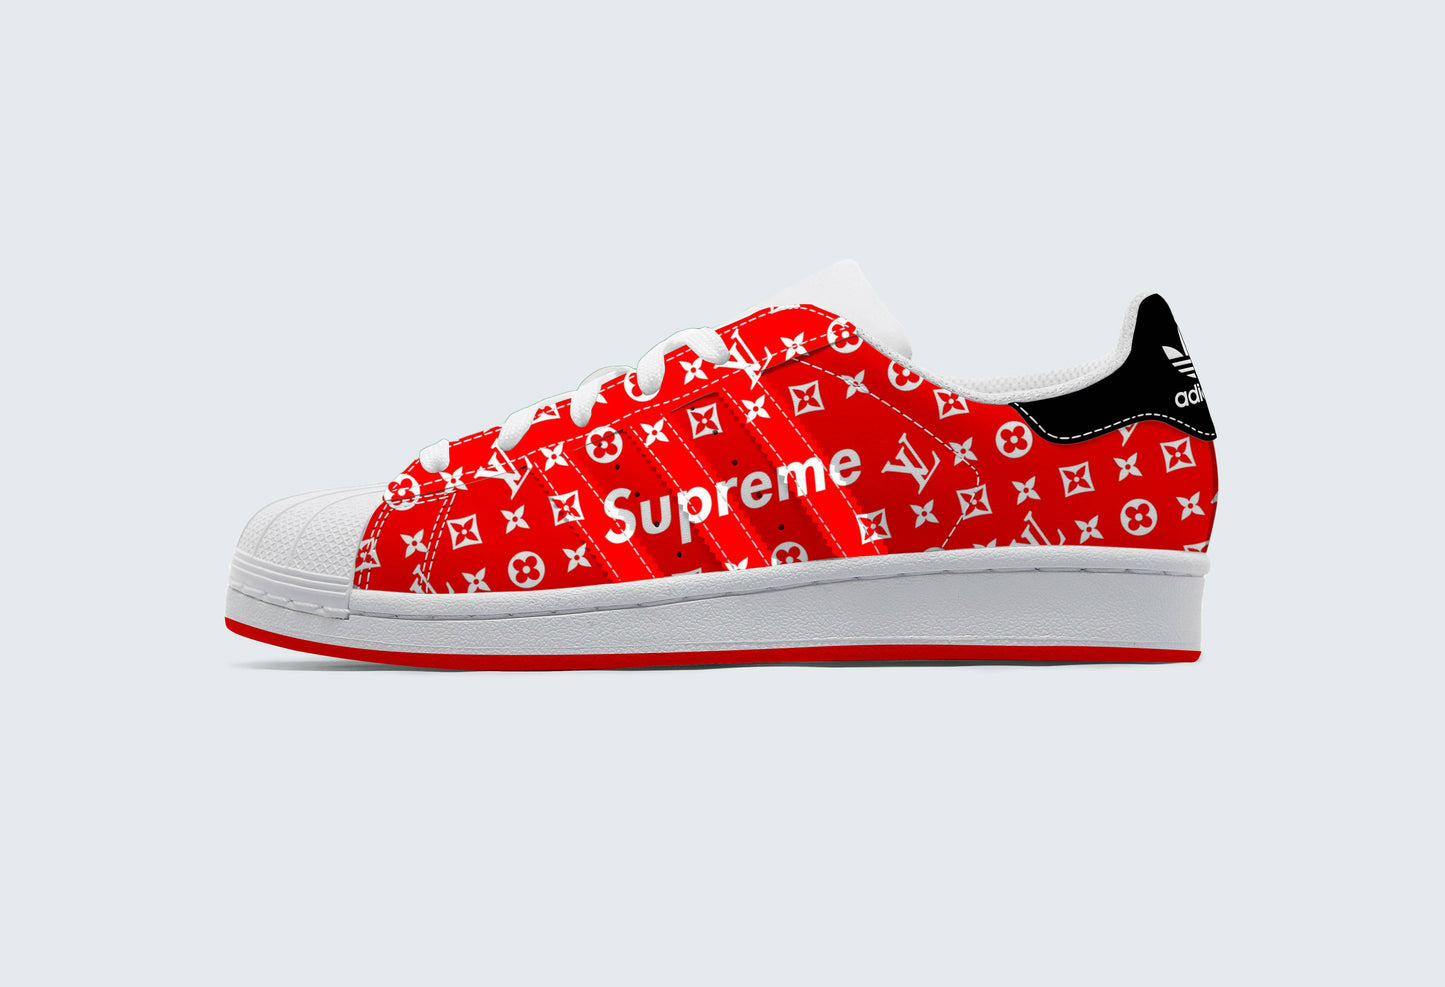 LV x Supreme Pattern inspired collection (6 versions)